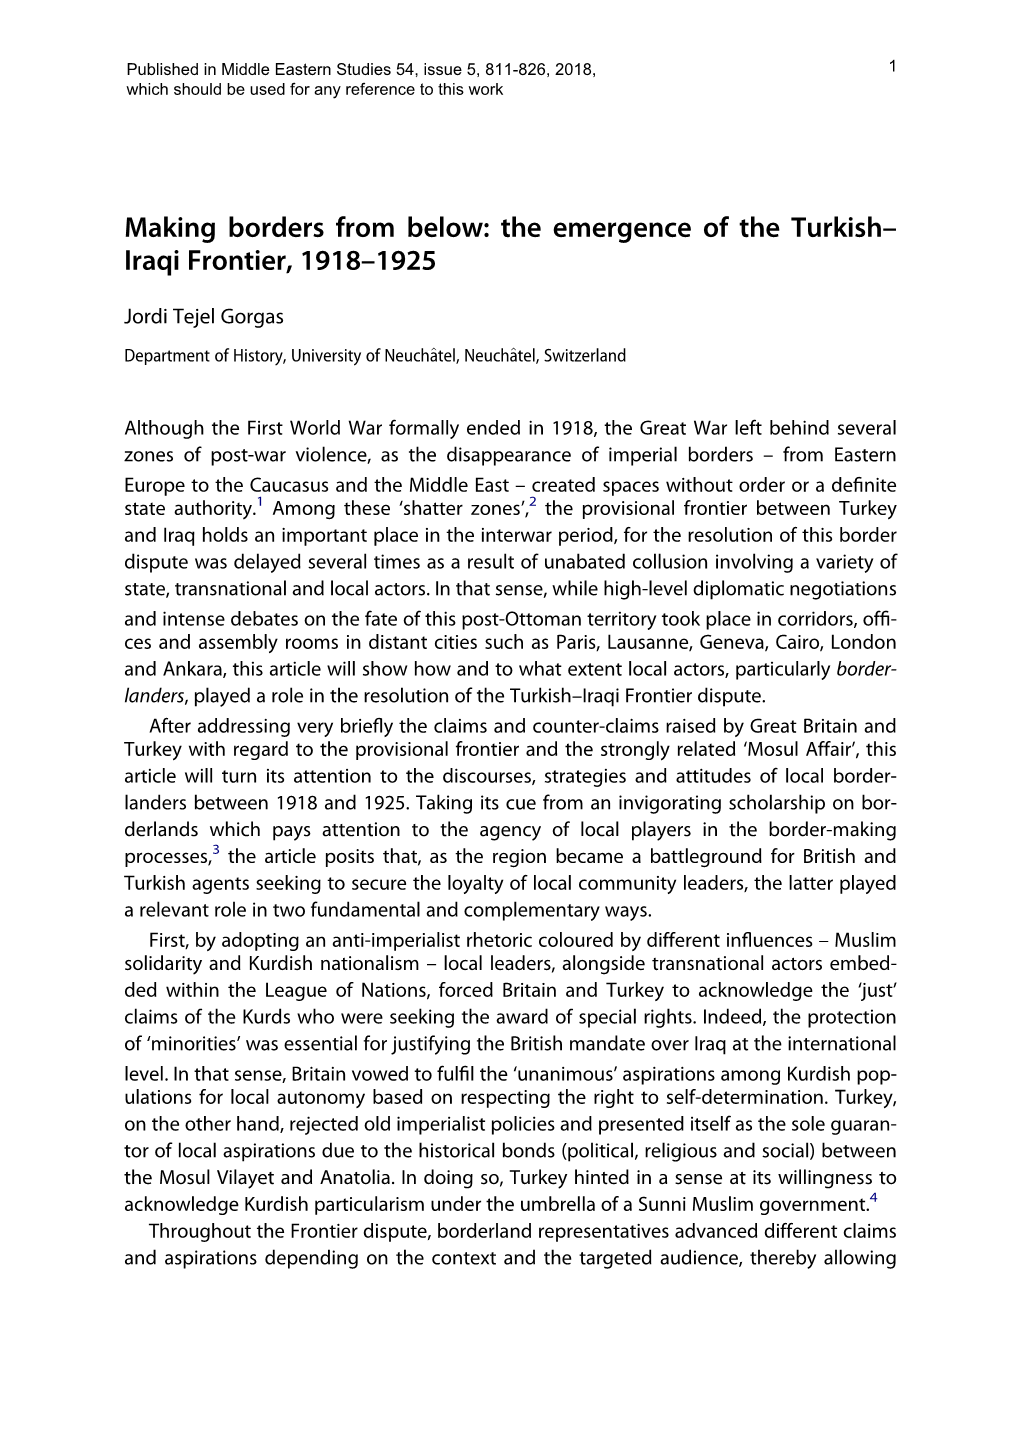 Making Borders from Below: the Emergence of the Turkish-Iraqi Frontier, 1918-1925